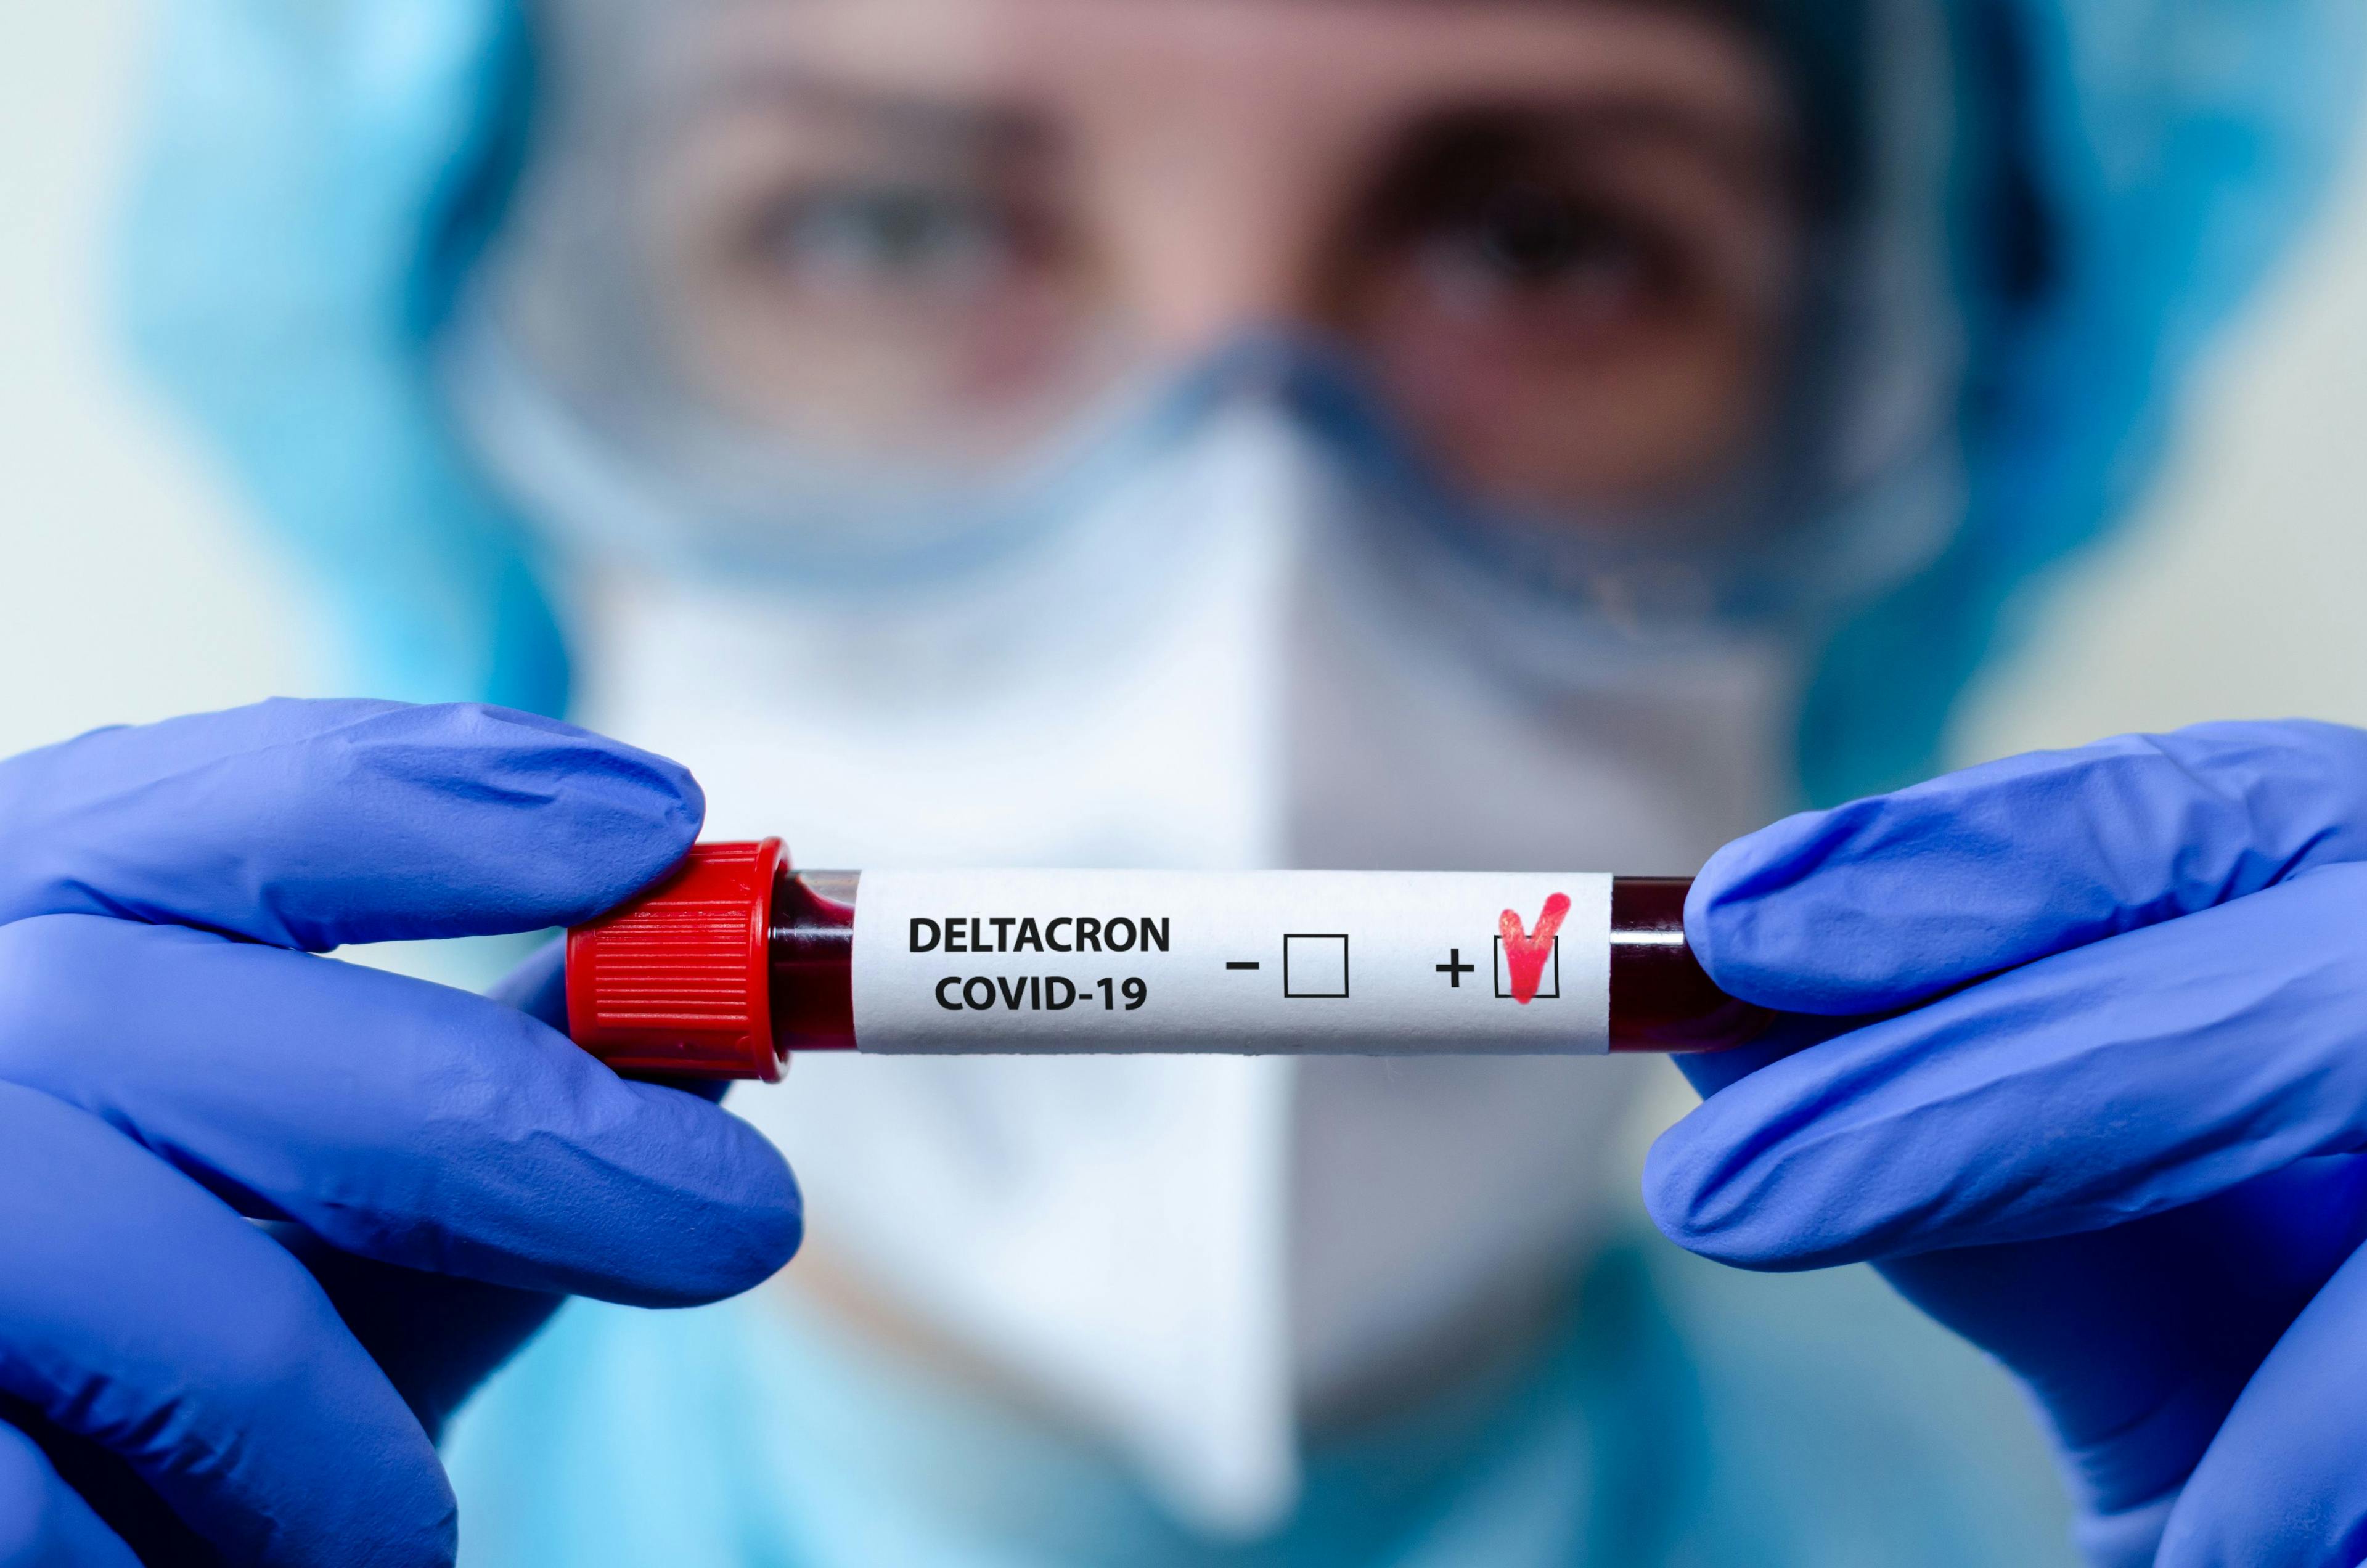 New “Deltacron” COVID-19 Sub-Variant Could Be as Contagious as Measles